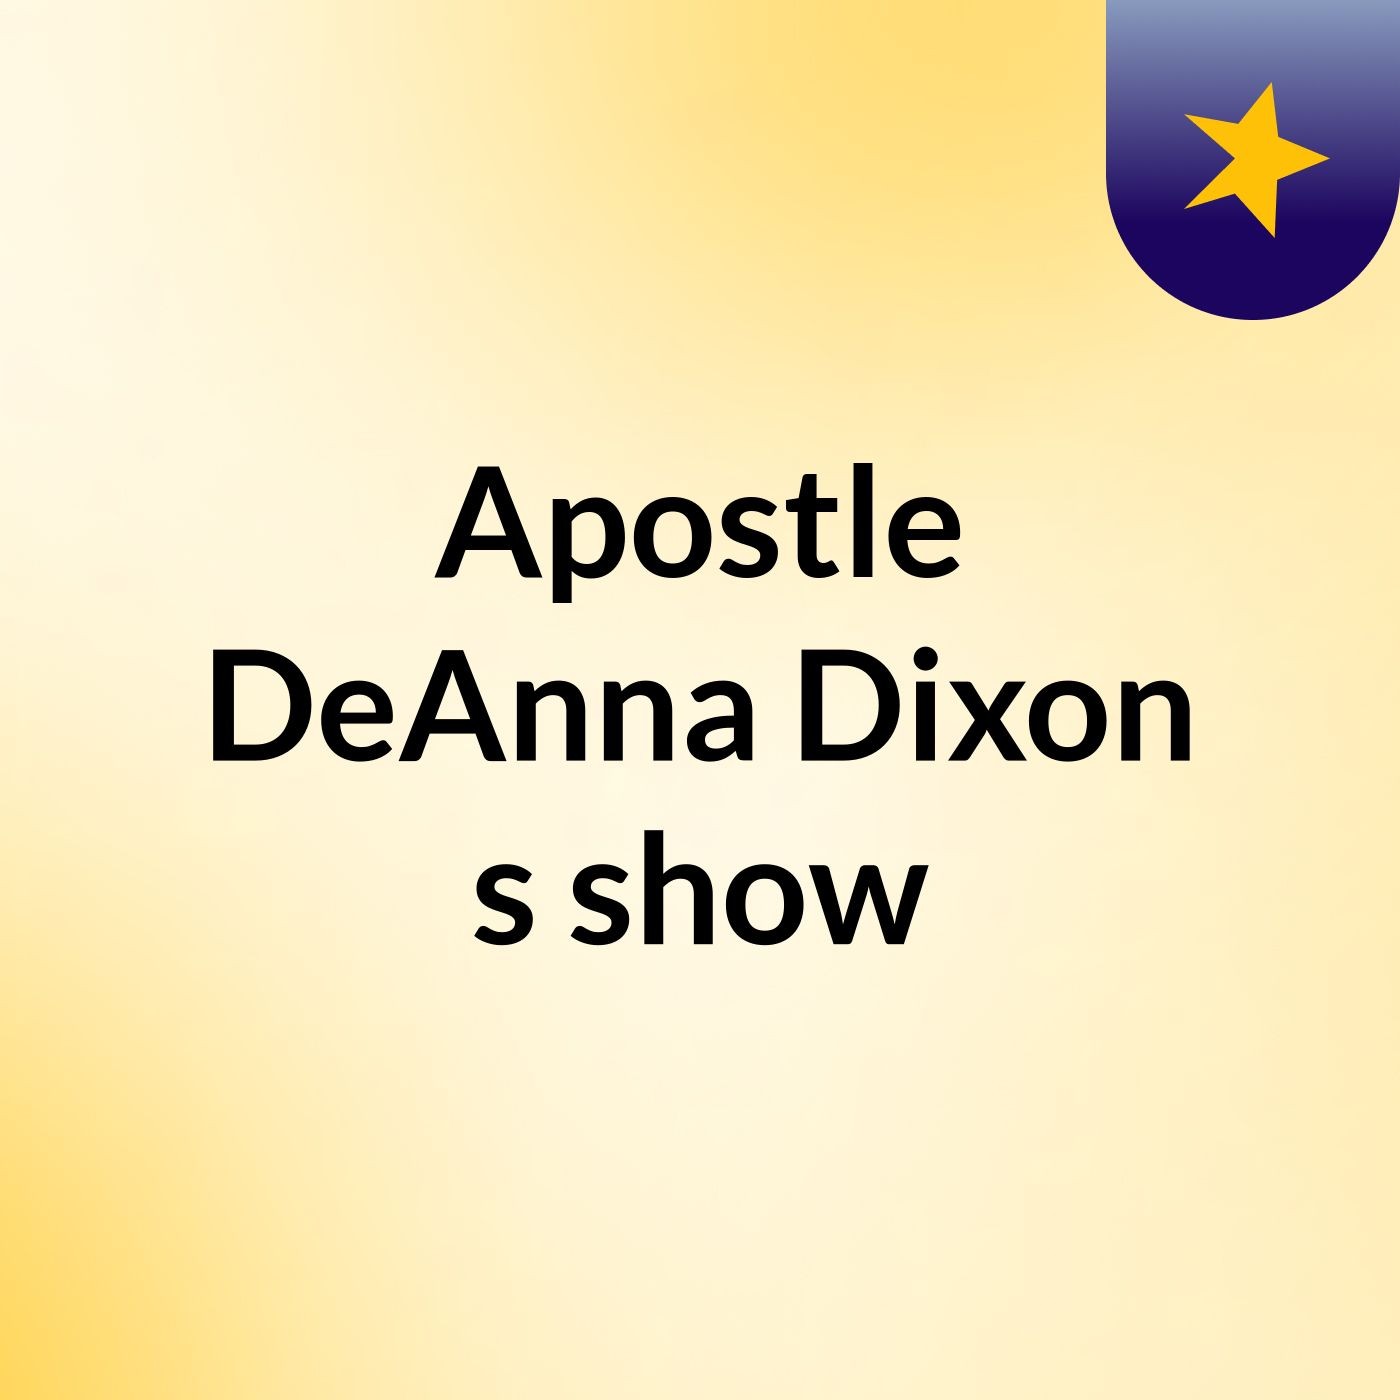 A SAMPLE OF THE NEW CD TO BE RELEASED BY APOSTLE DEANNA DIXON THE END OF THE MONTH